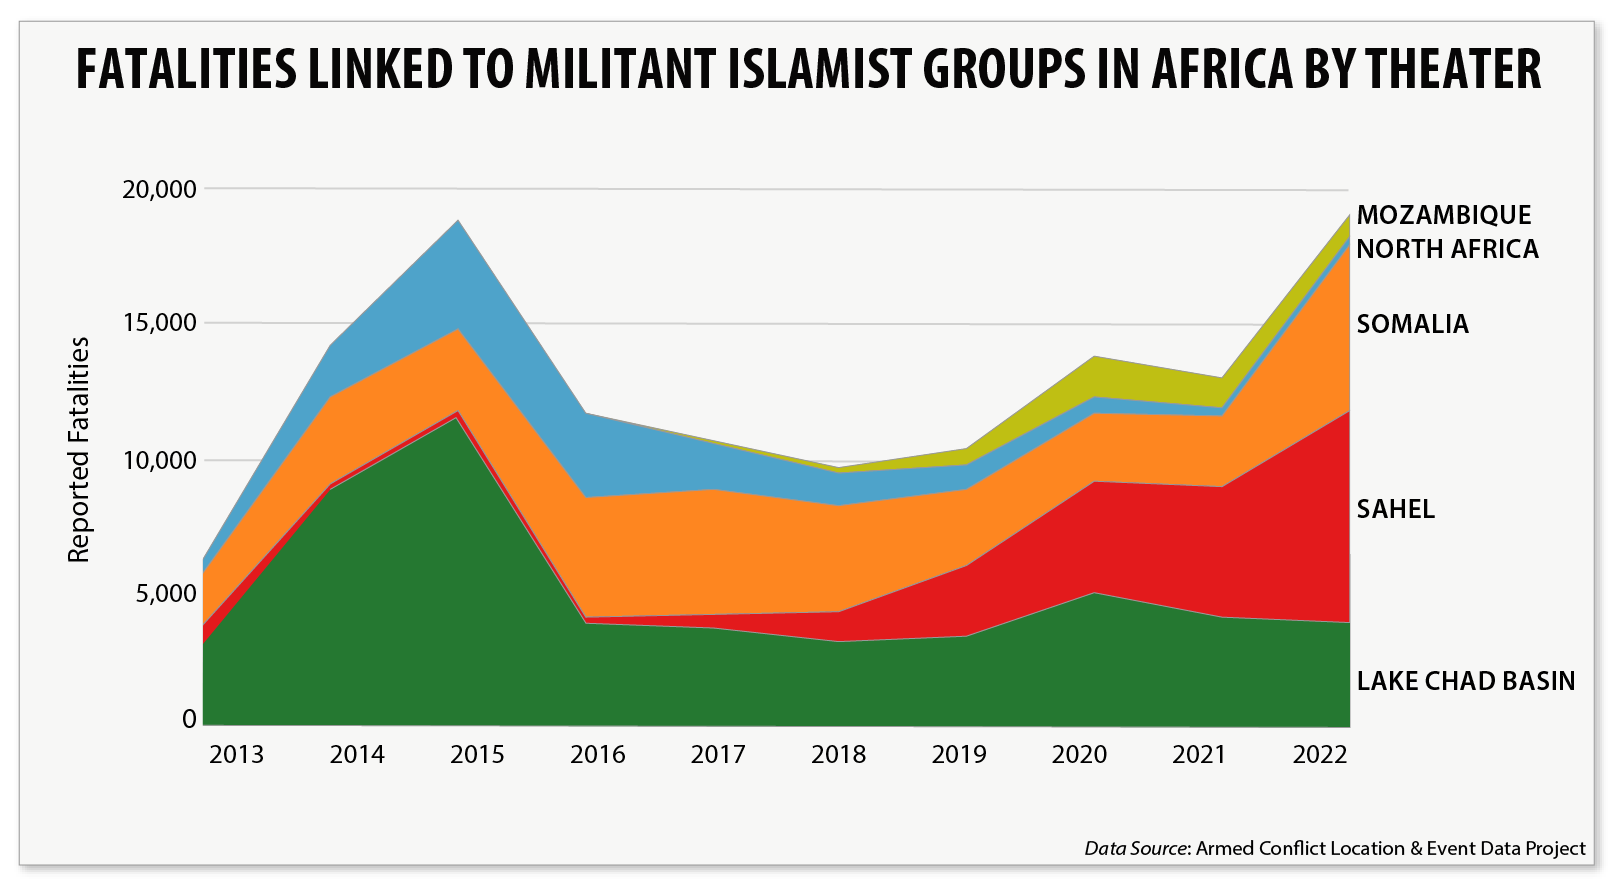 Fatalities linked to militant Islamist groups in Africa by theater